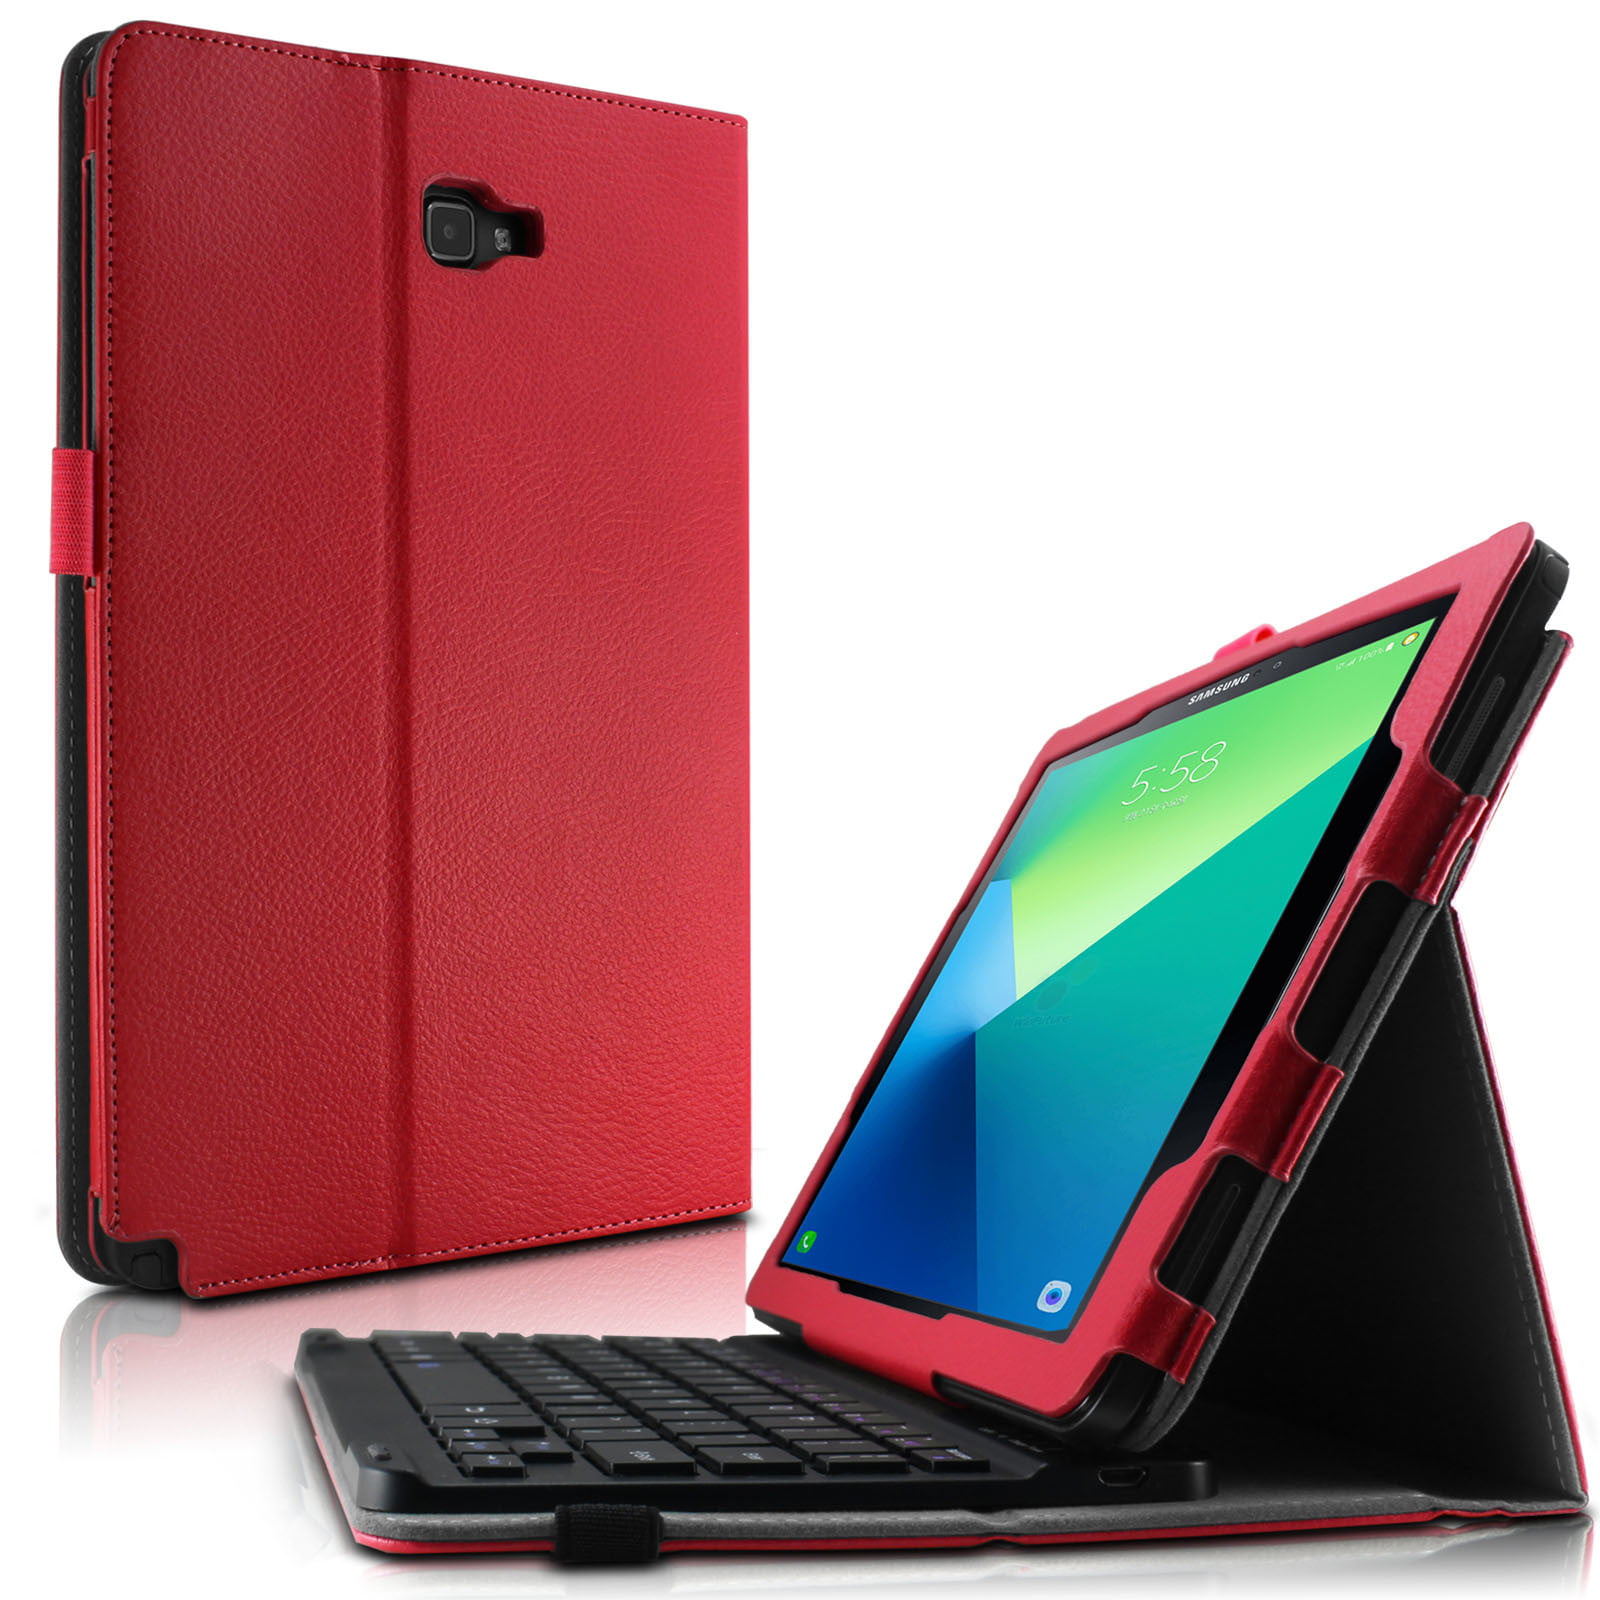 Infiland Folio PU Leather Case Cover with Detachable Bluetooth Keyboard for Samsung